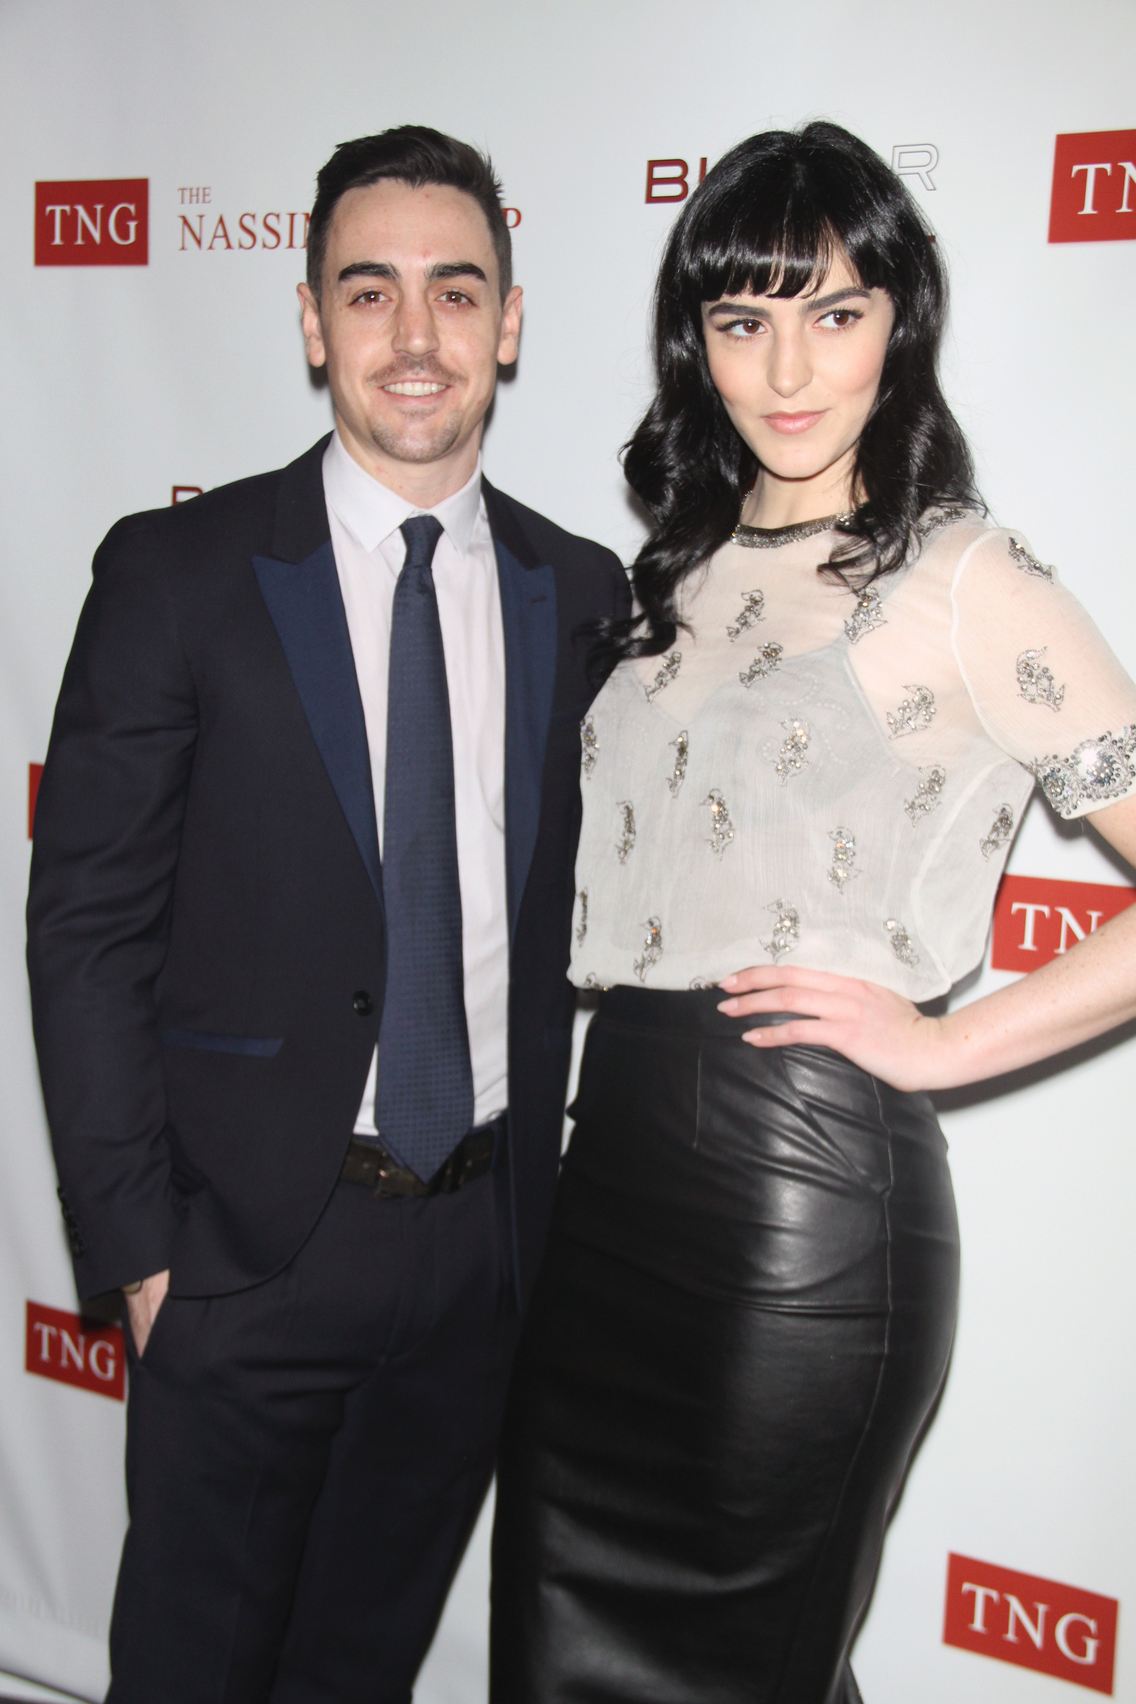 Ali Lohan hit the red carpet at the TNG Holiday Launch Celebration